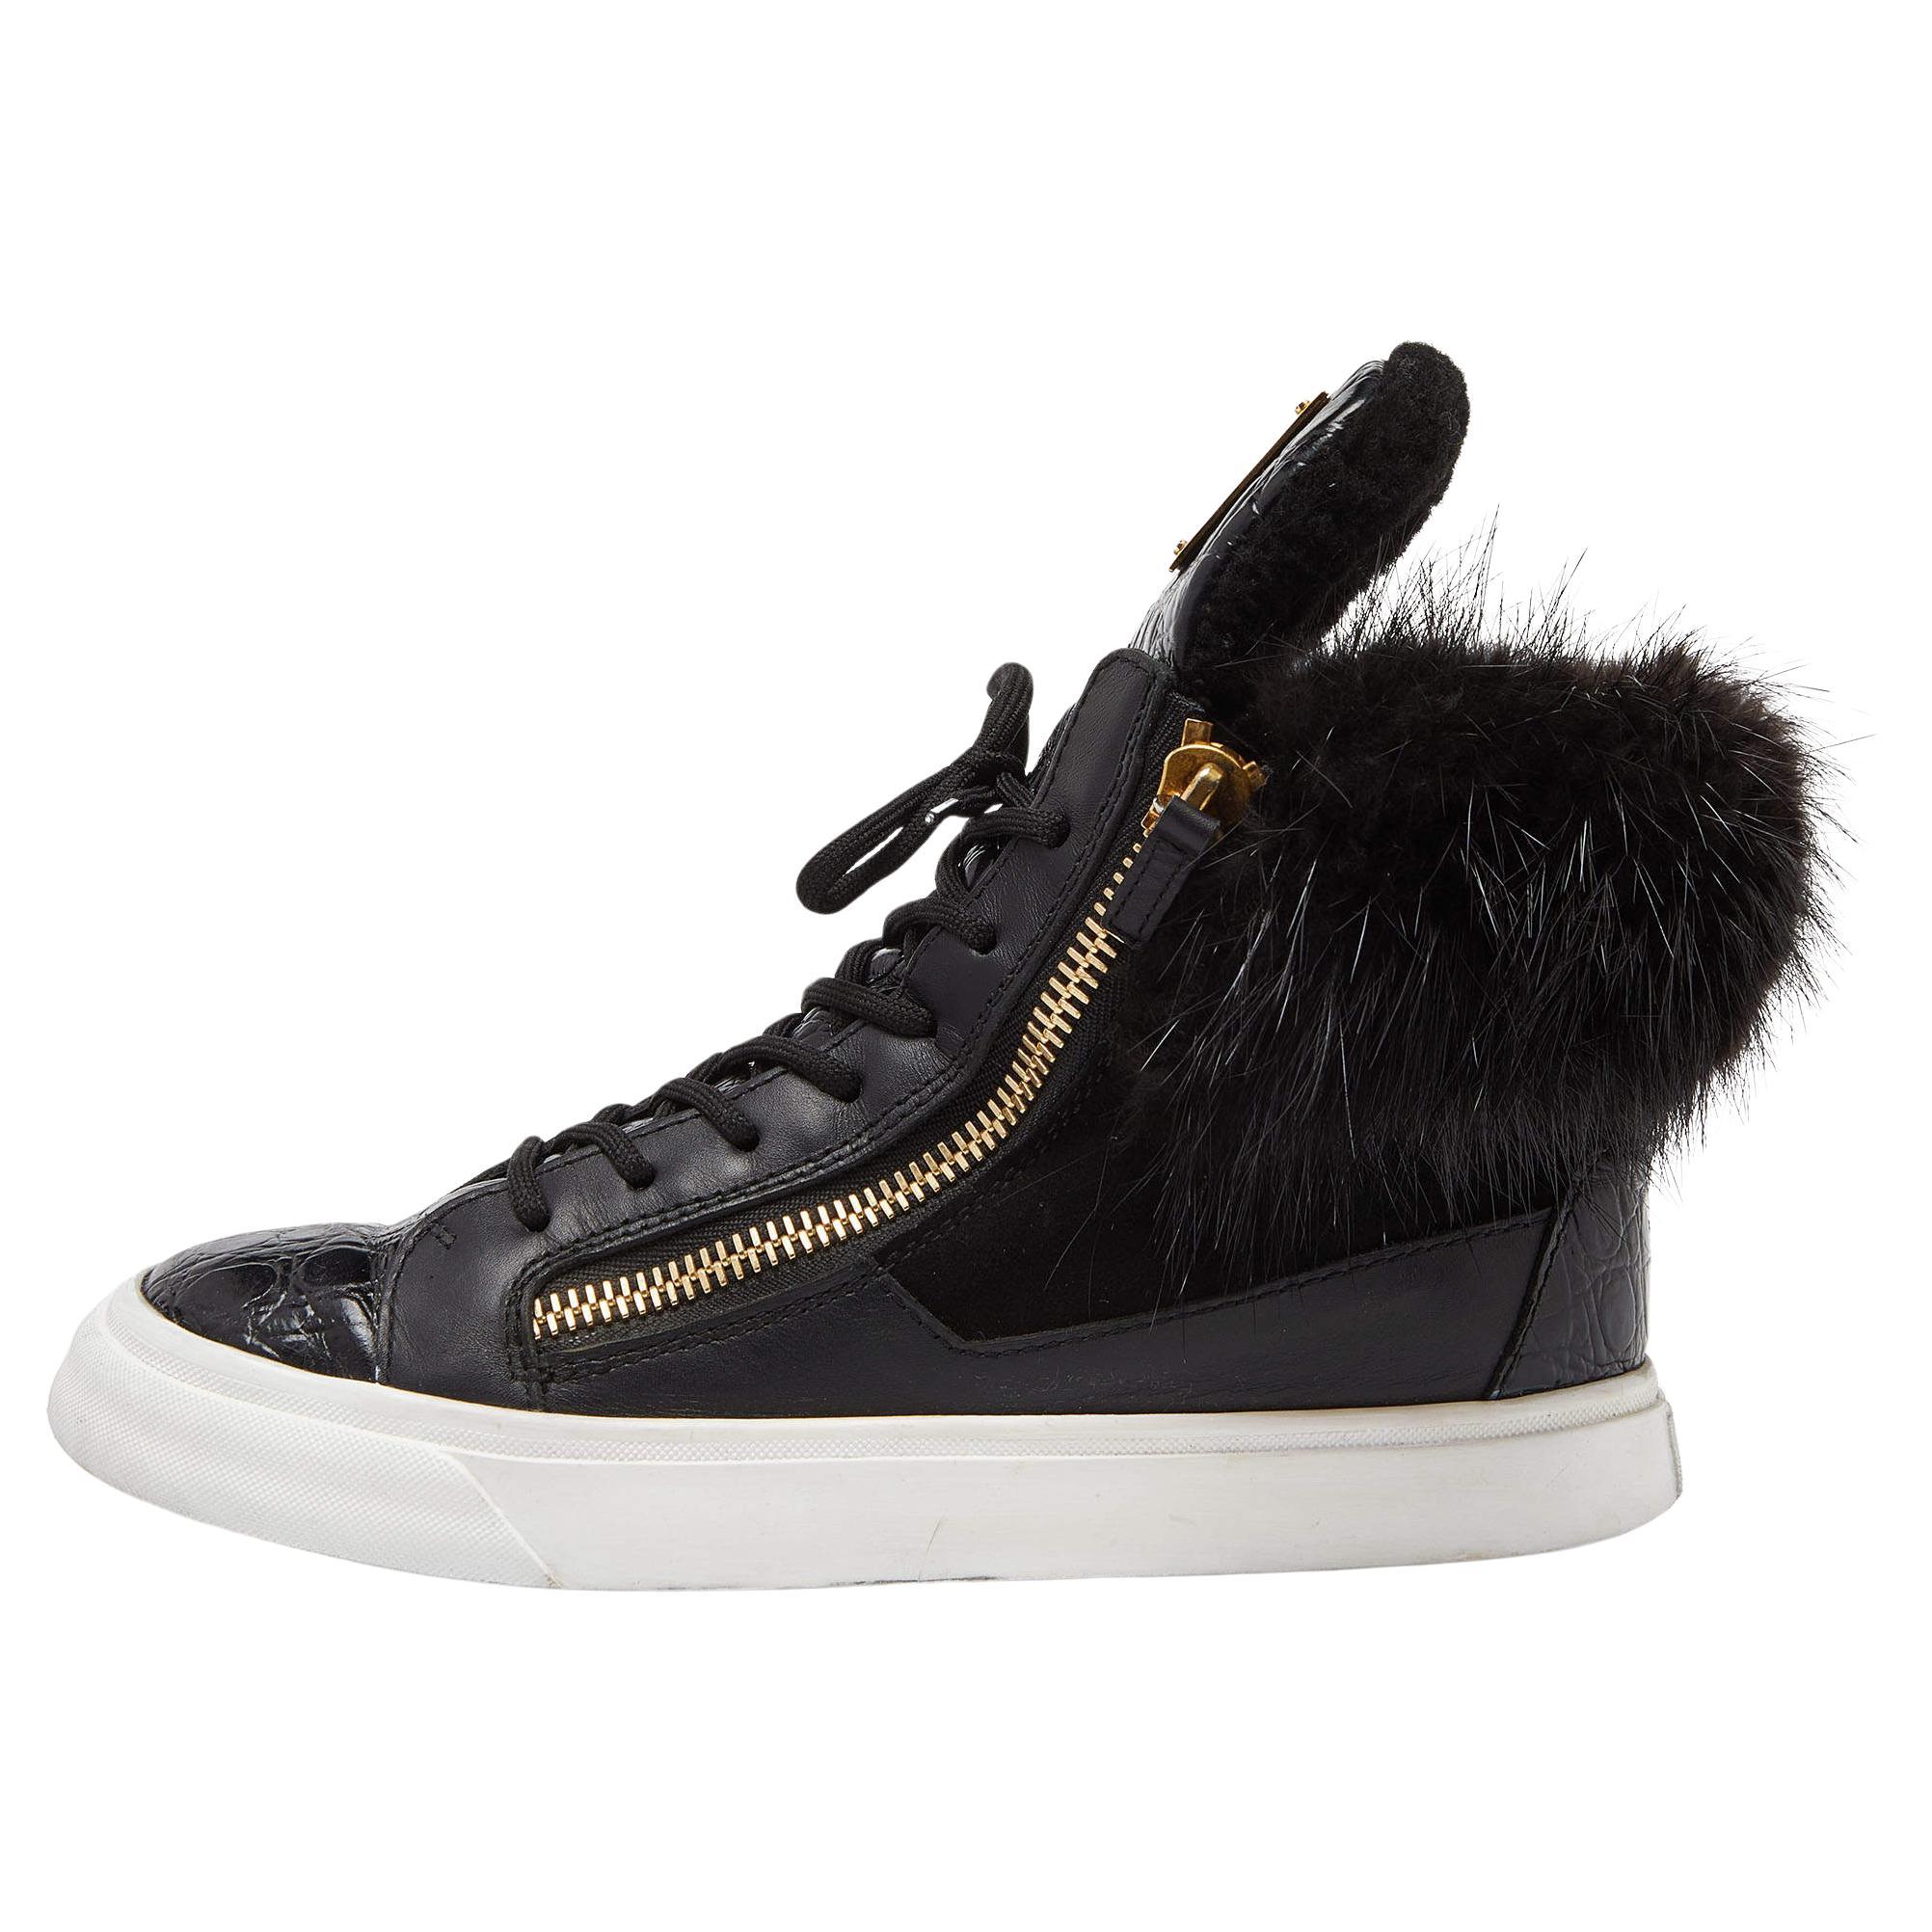 Giuseppe Zanotti Black Leather Suede and Calfhair London High-Top Sneakers Size  For Sale